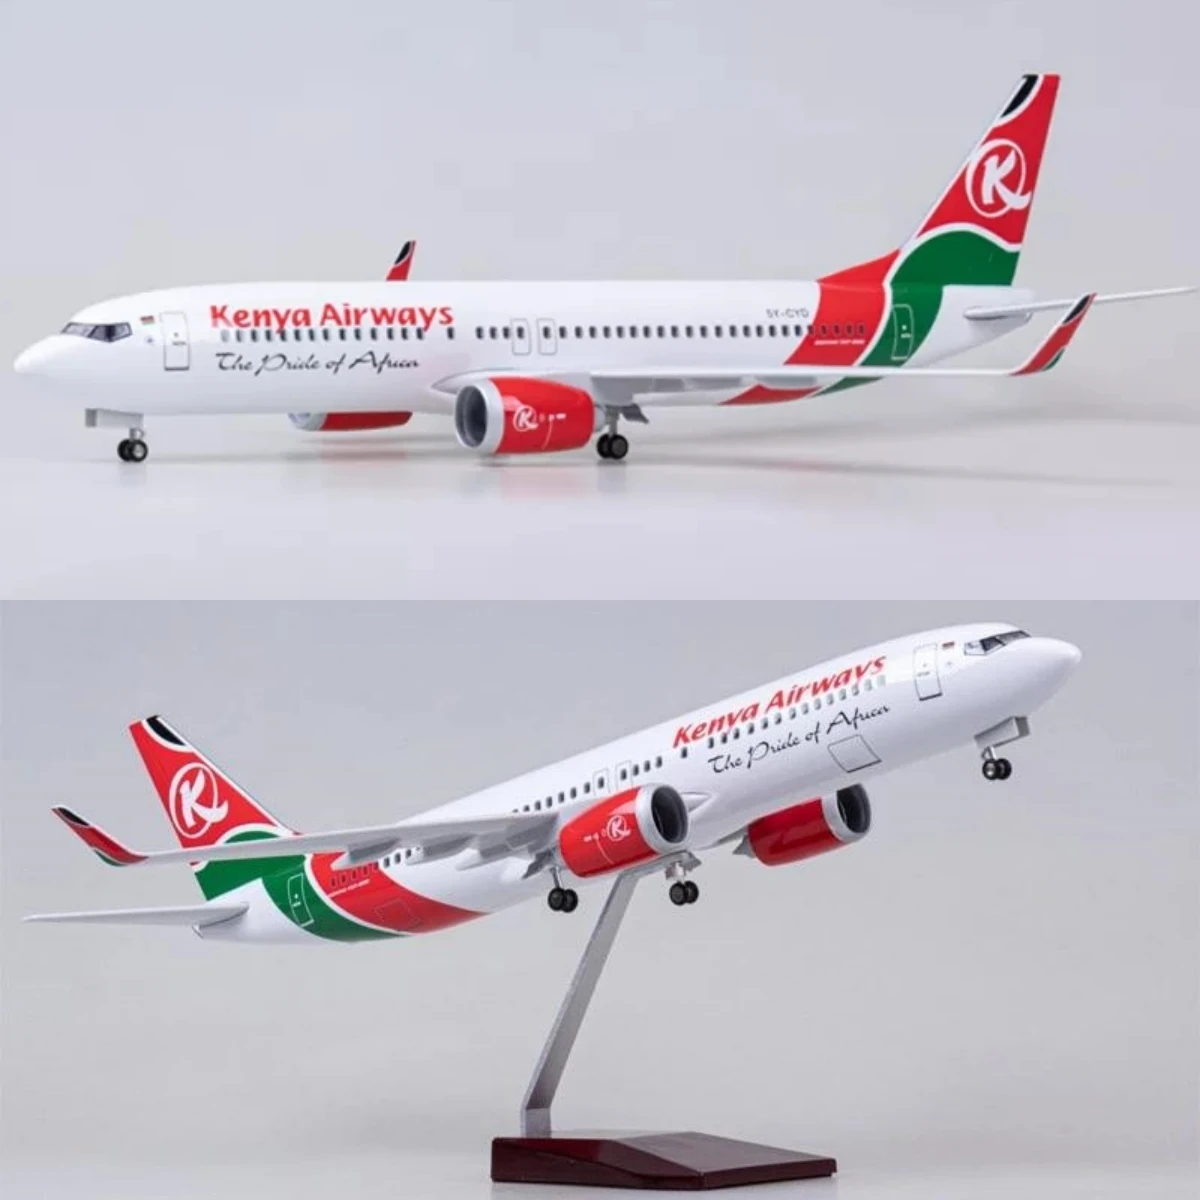 

1/85 Scale 47CM Aircraft 737 MAX B737 Kenya Airways Die-cast Plastic Resin Aircraft Model with Lights and Landing Gear Ornament